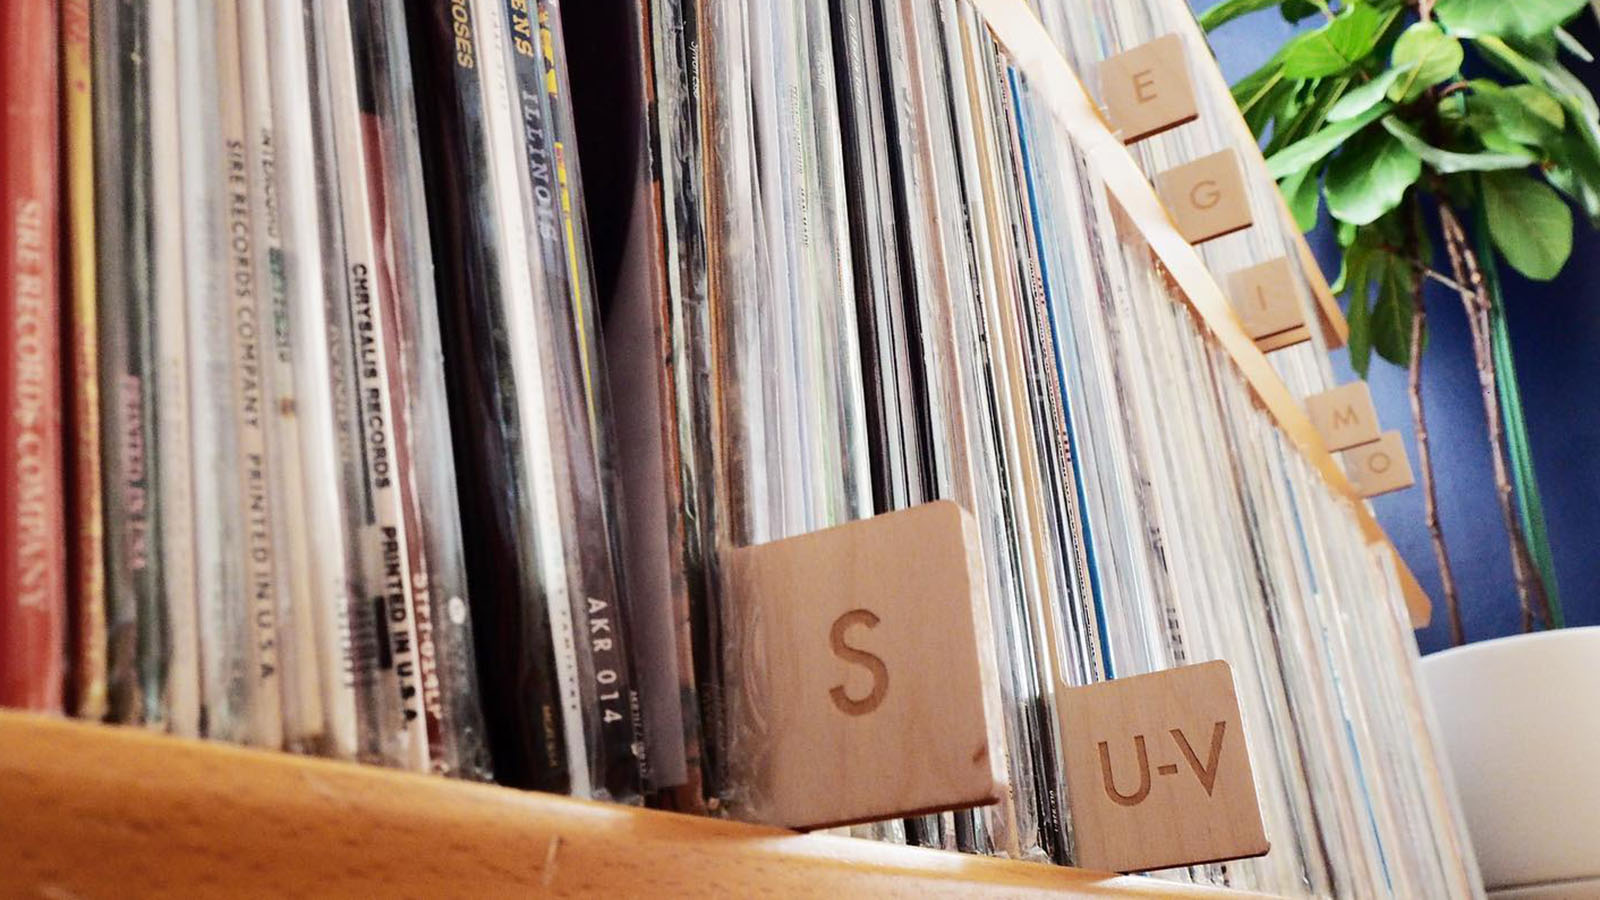 a shelf containing many vinyl records in sleeves with wooden alphabetical separators